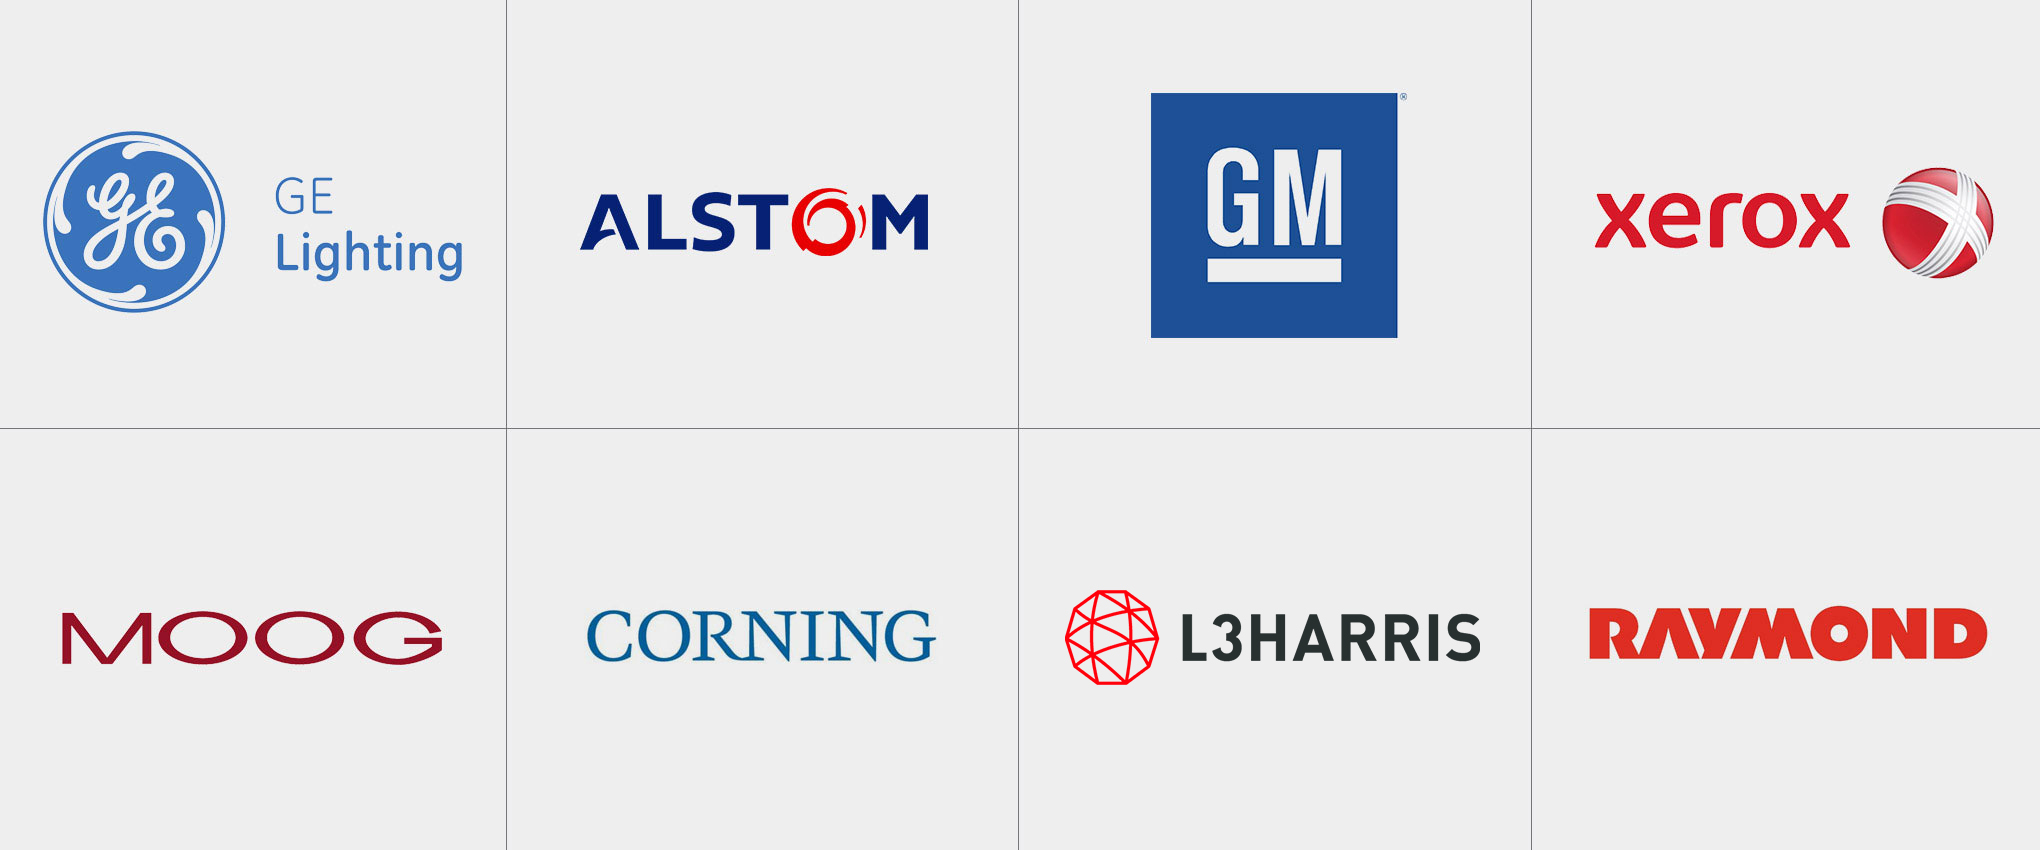 Eight logos for companies who sponsor their employees to study engineering leadership at RIT, including GE Lighting, General Motors, L3Harris, and Xerox.